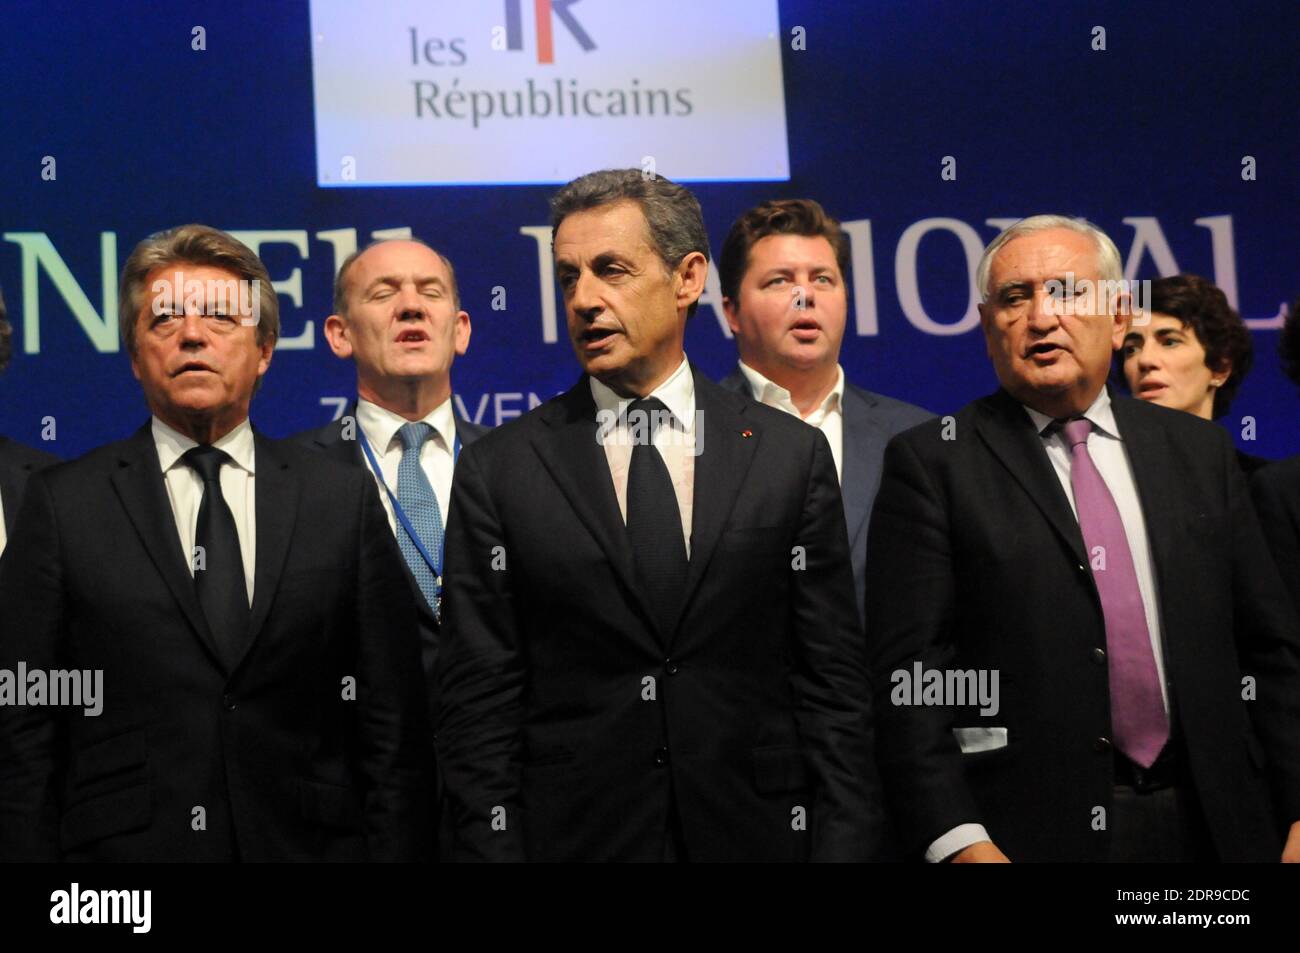 Laurent Wauquiez, President of the right-wing party Les Republicains Nicolas Sarkozy, President of LR's national council and former prime minister Jean-Pierre Raffarin during the national council of Les Republicans party in Paris, France, on November 7, 2015. Photo by Alain Apaydin/ABACAPRESS.COM Stock Photo